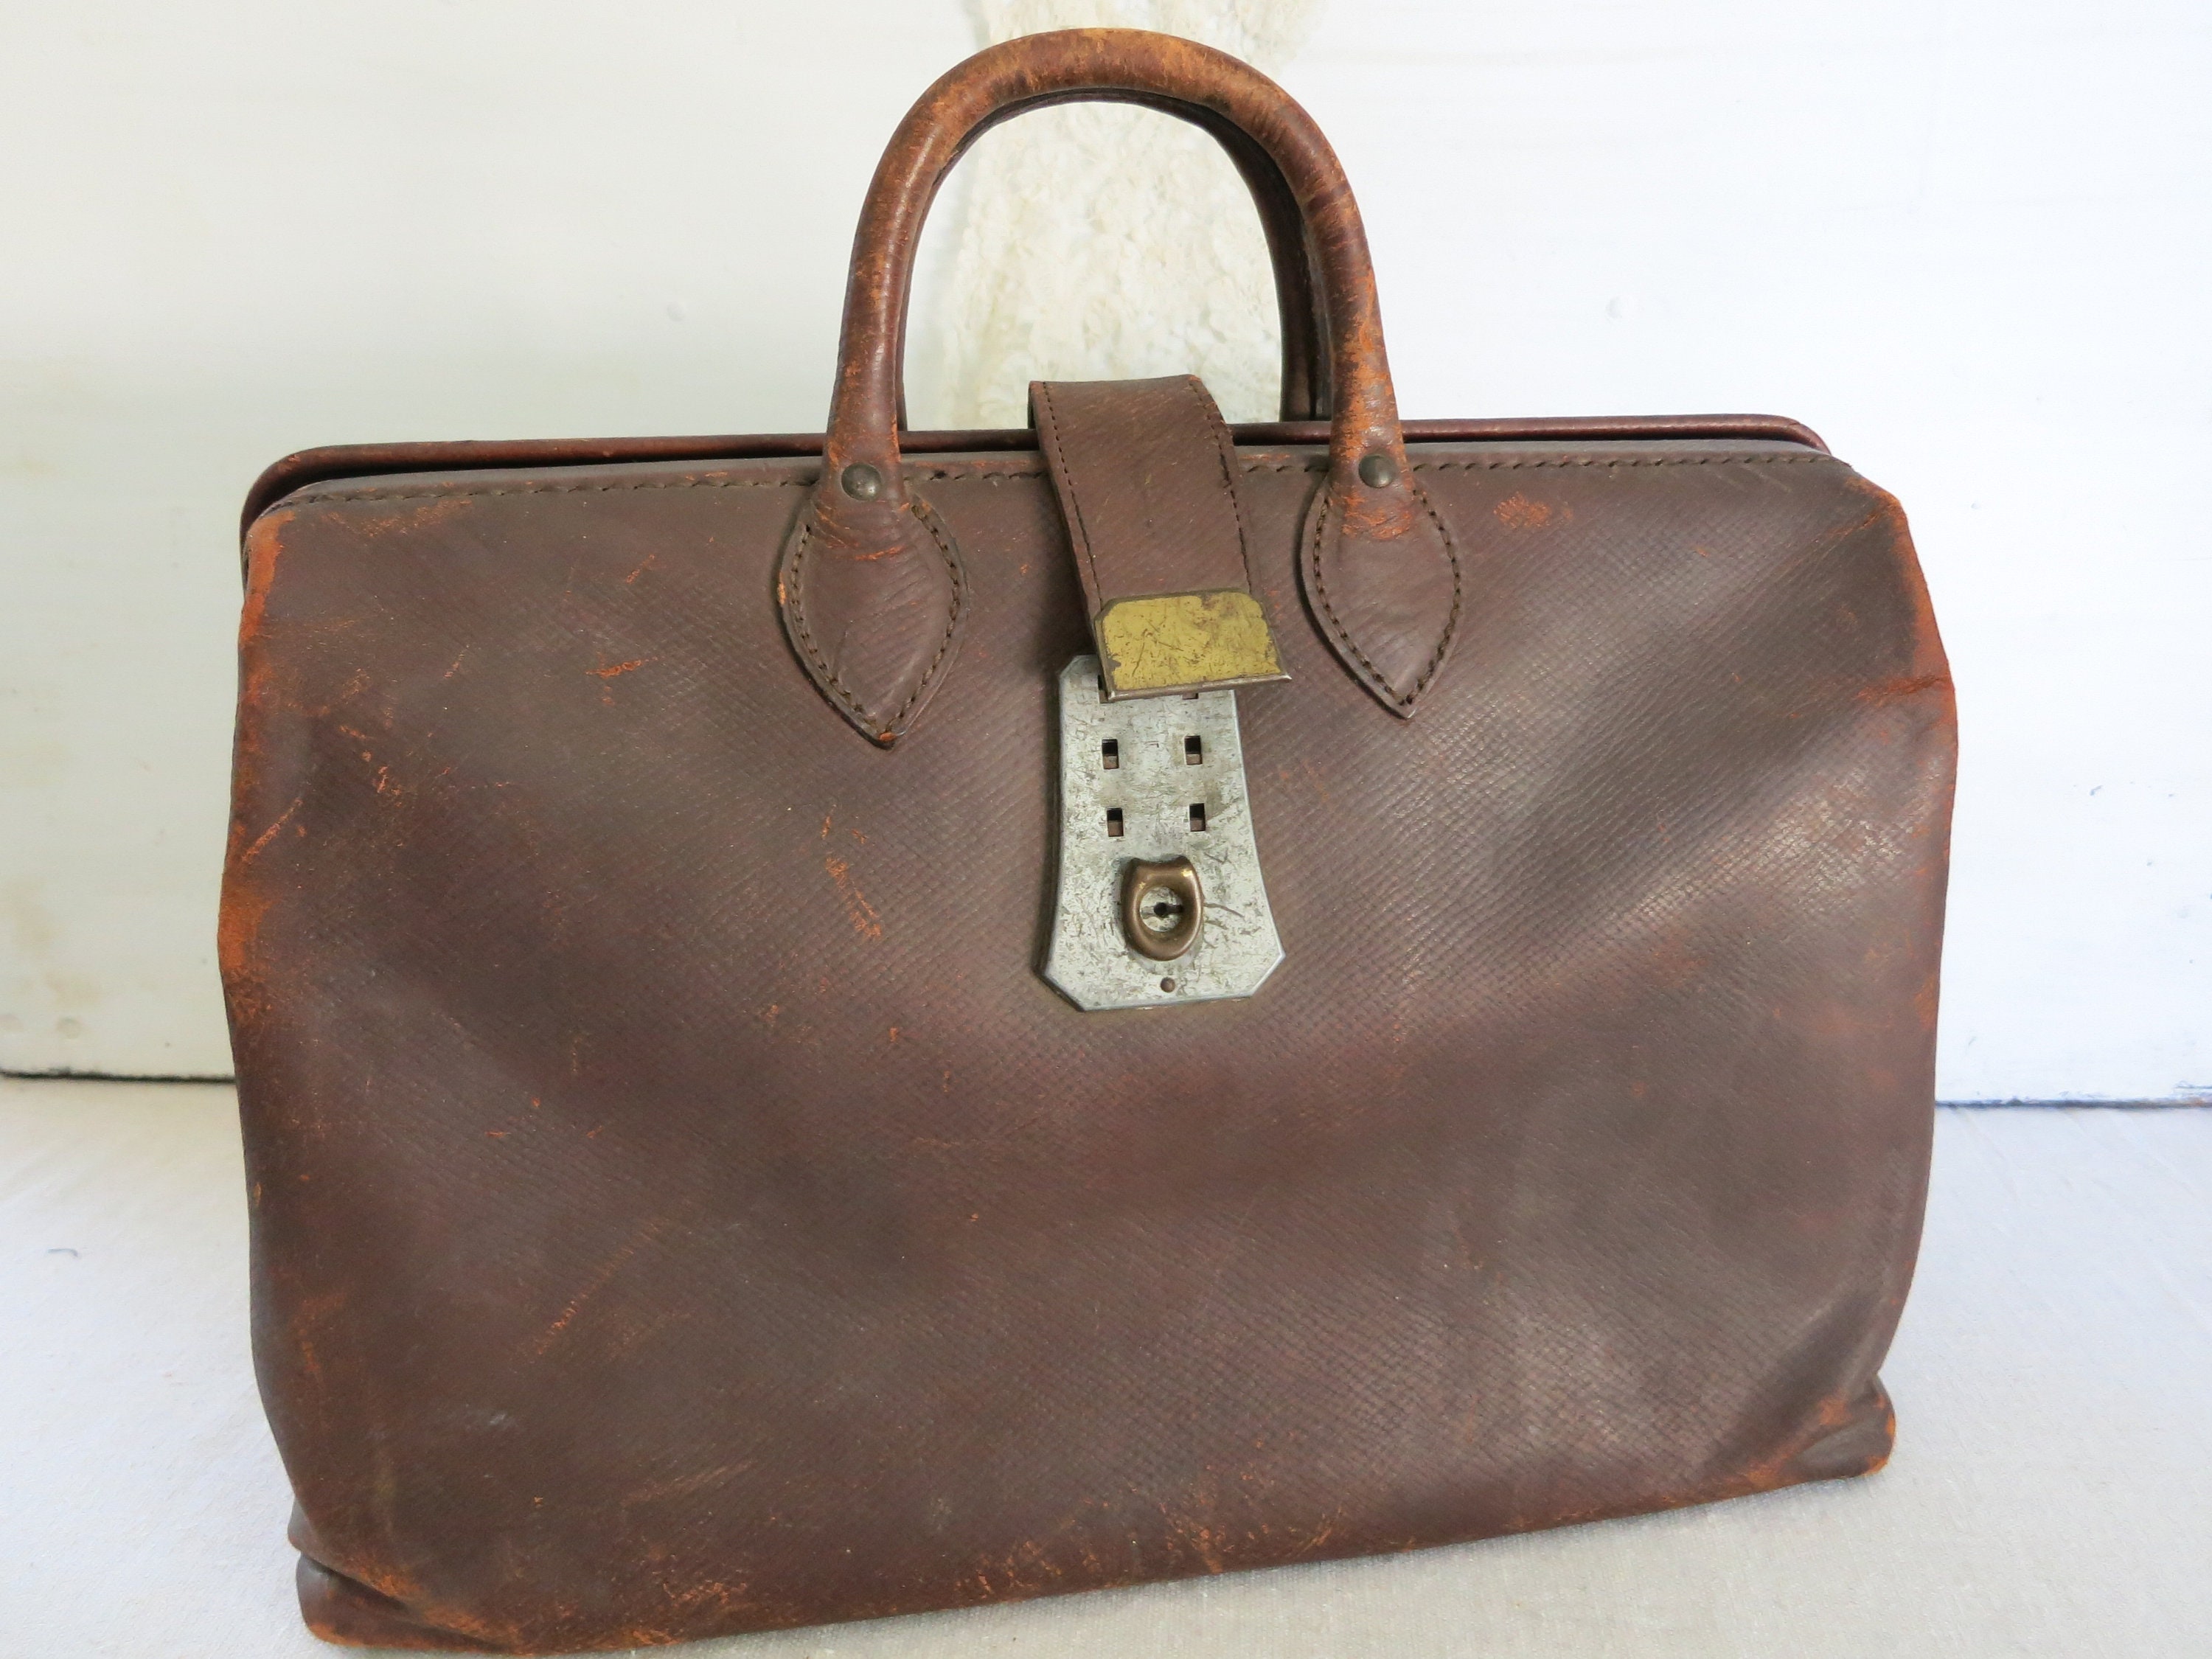 An old battered leather medical doctors bag containing a